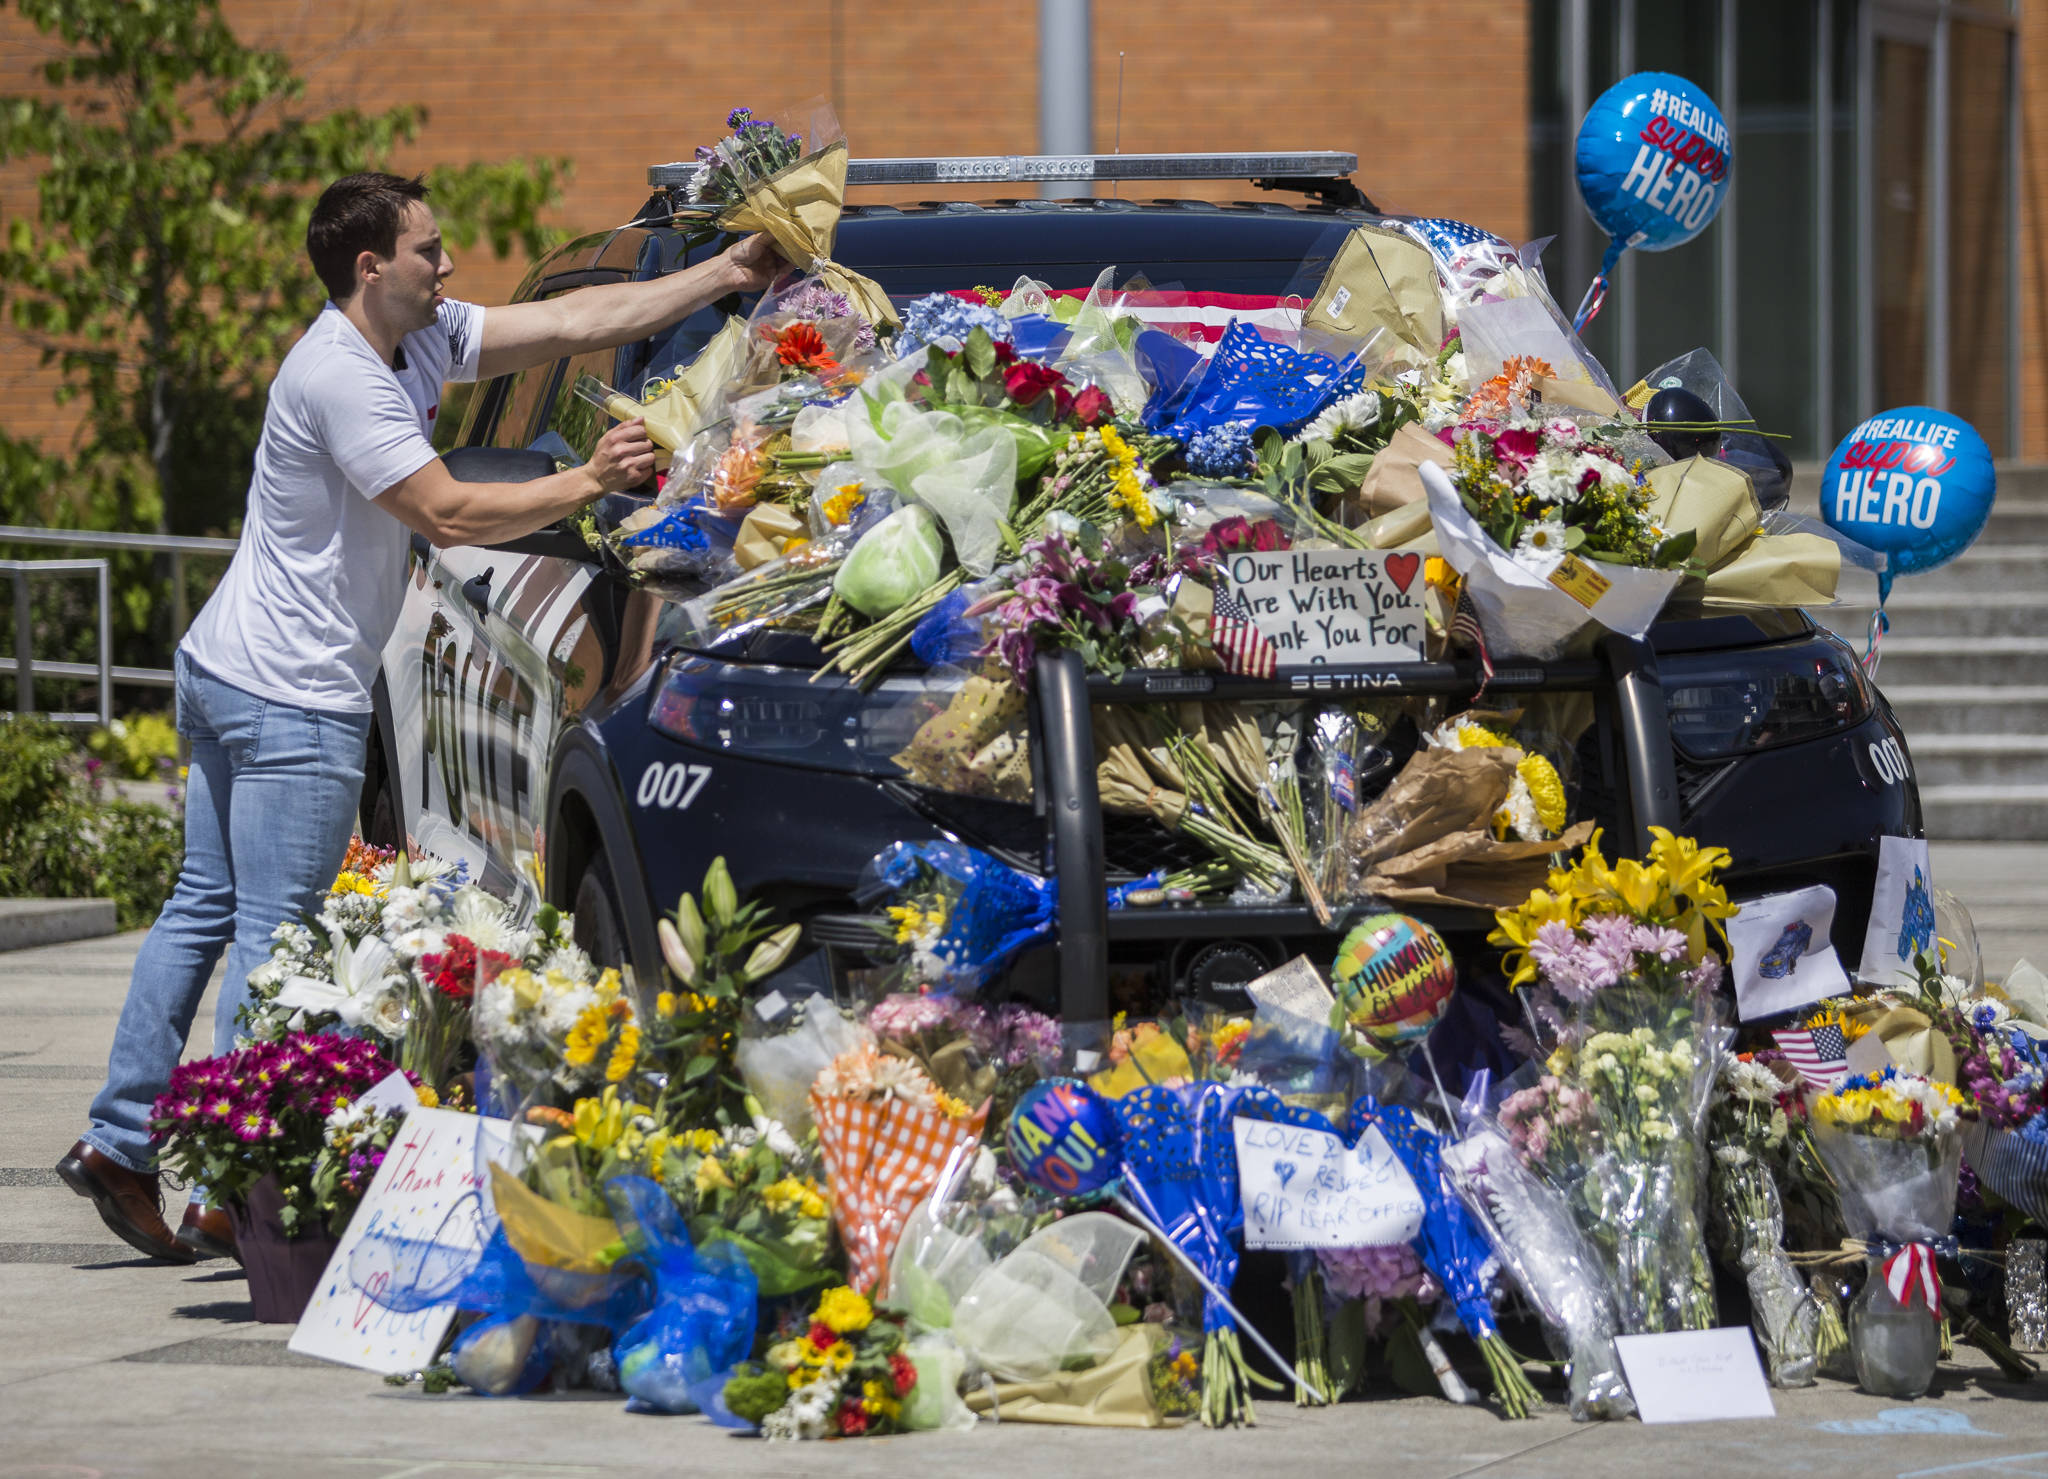 Tony Mandeville places a bouquet of flowers on the windshield of a Bothell Police Department vehicle that was turned into a memorial Tuesday in front of Bothell City Hall. (Olivia Vanni / The Herald)